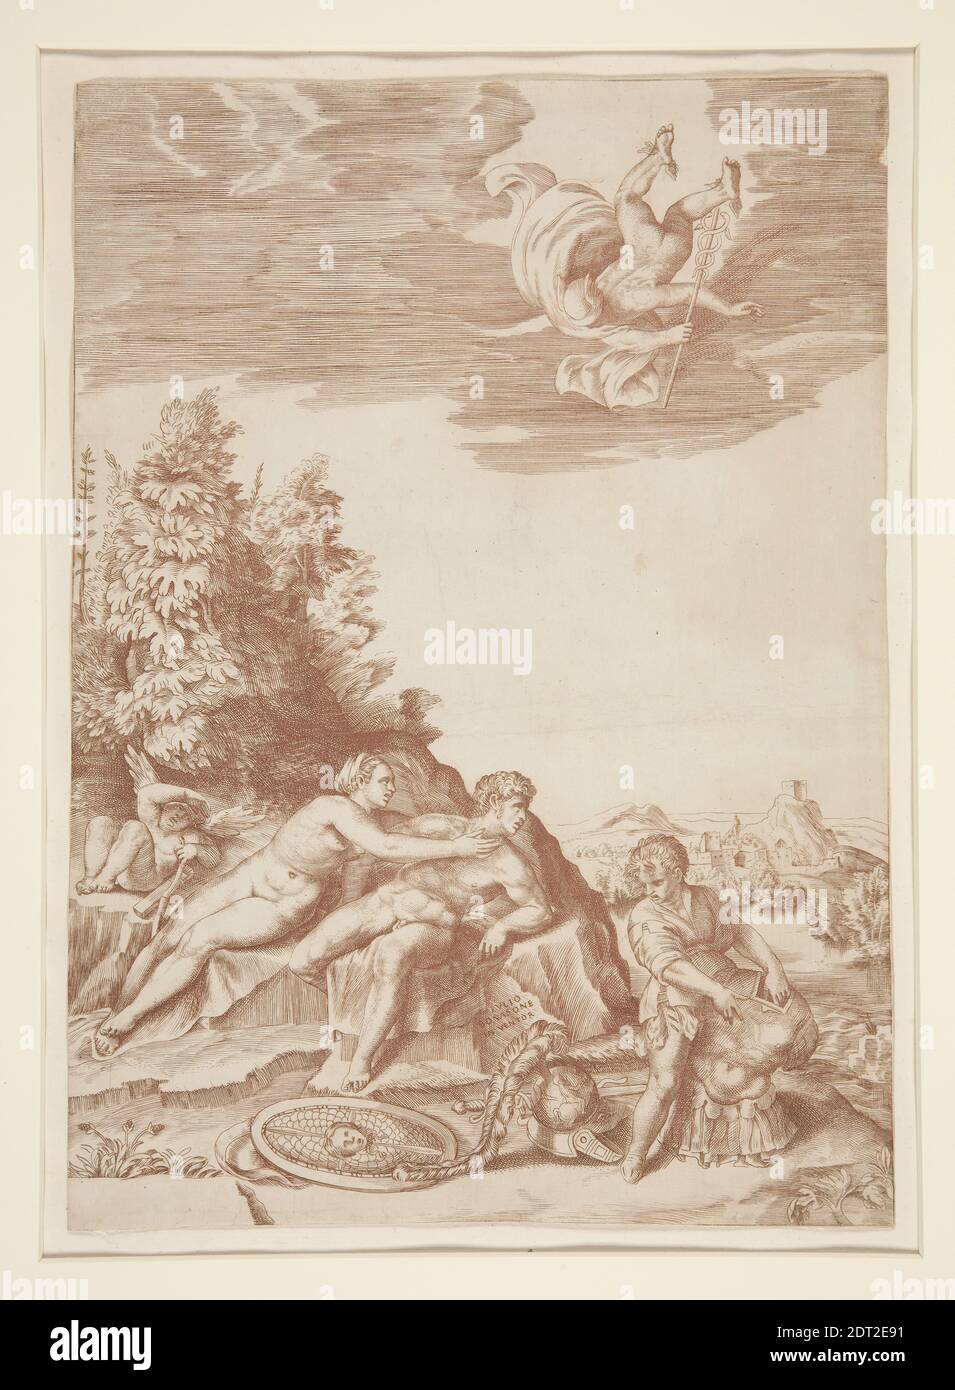 Engraver: Giulio di Antonio Bonasone, Italian, ca. 1510–after 1576, Calypso attempting to detain Ulysses, mid 16th century, Engraving, printed in red-brown ink, image: 21.5 × 30 cm (8 7/16 × 11 13/16 in.), Made in Italy, Italian, 16th century, Works on Paper - Prints Stock Photo